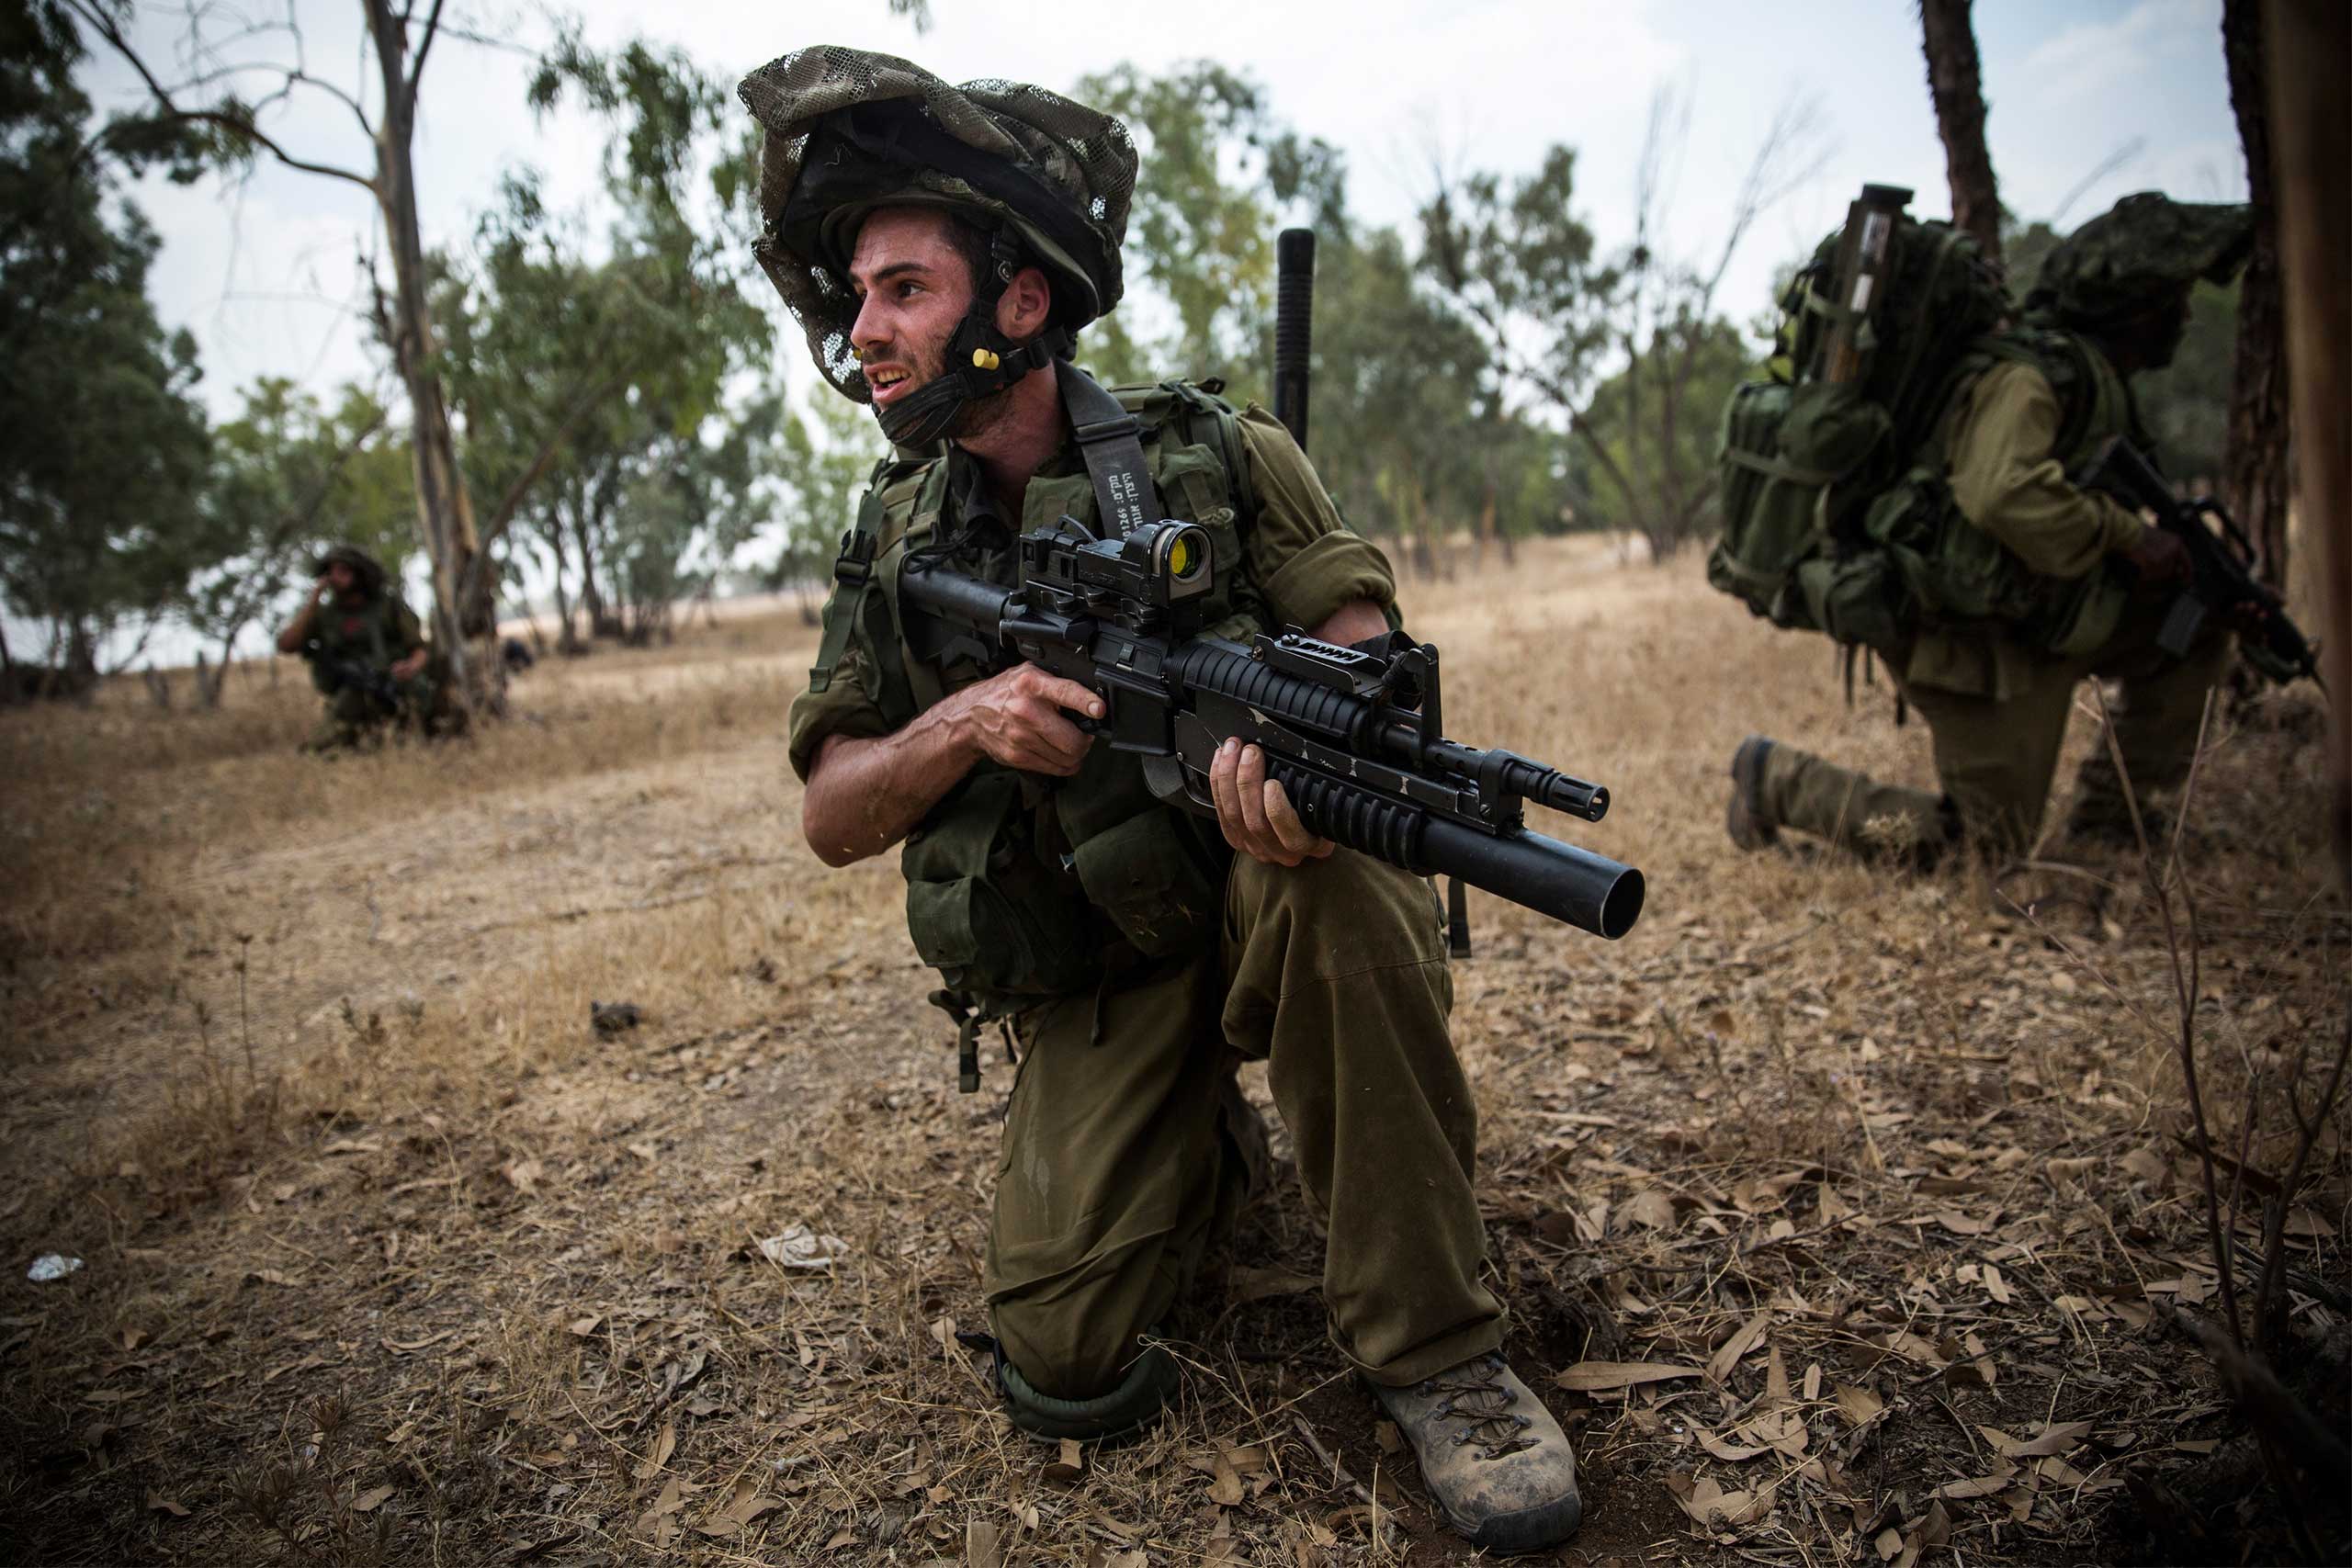 Israeli soldiers practice training missions close to the Israel-Gaza border as seen from near Sderot, Israel, July 22, 2014.